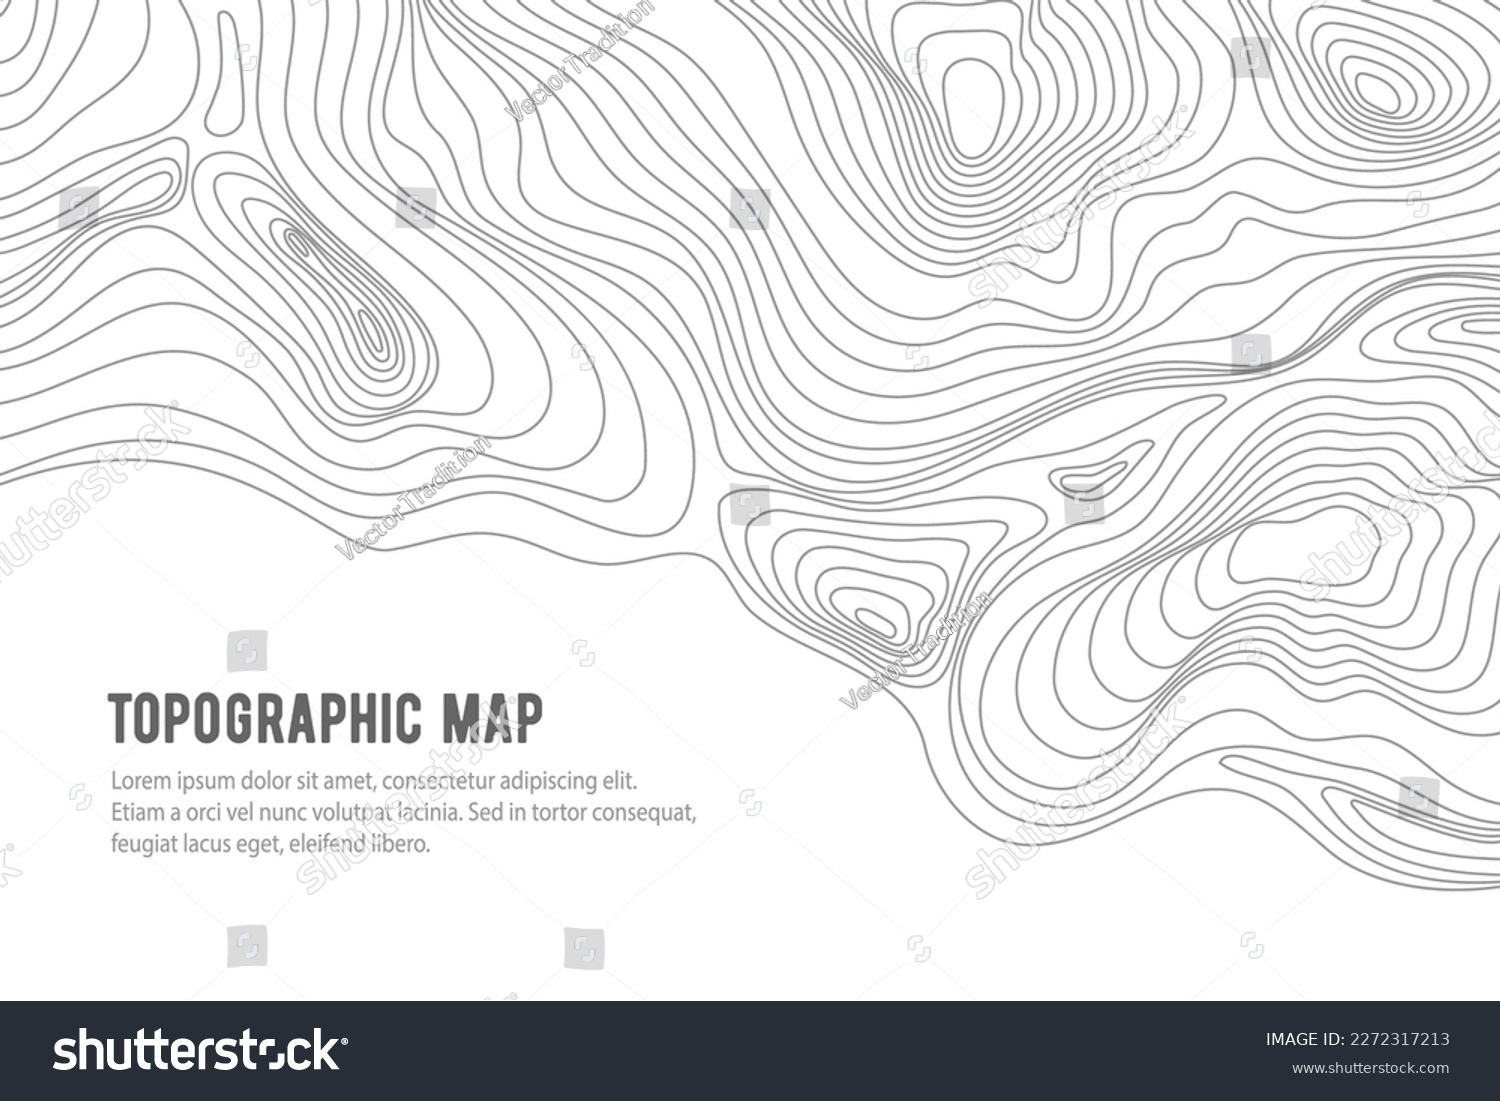 SVG of Topographic map, grid, texture, relief contour of terrain. Vector pattern background with mountains and flat land wavy line contours. Abstract monochrome topographic map, topography, cartography theme svg